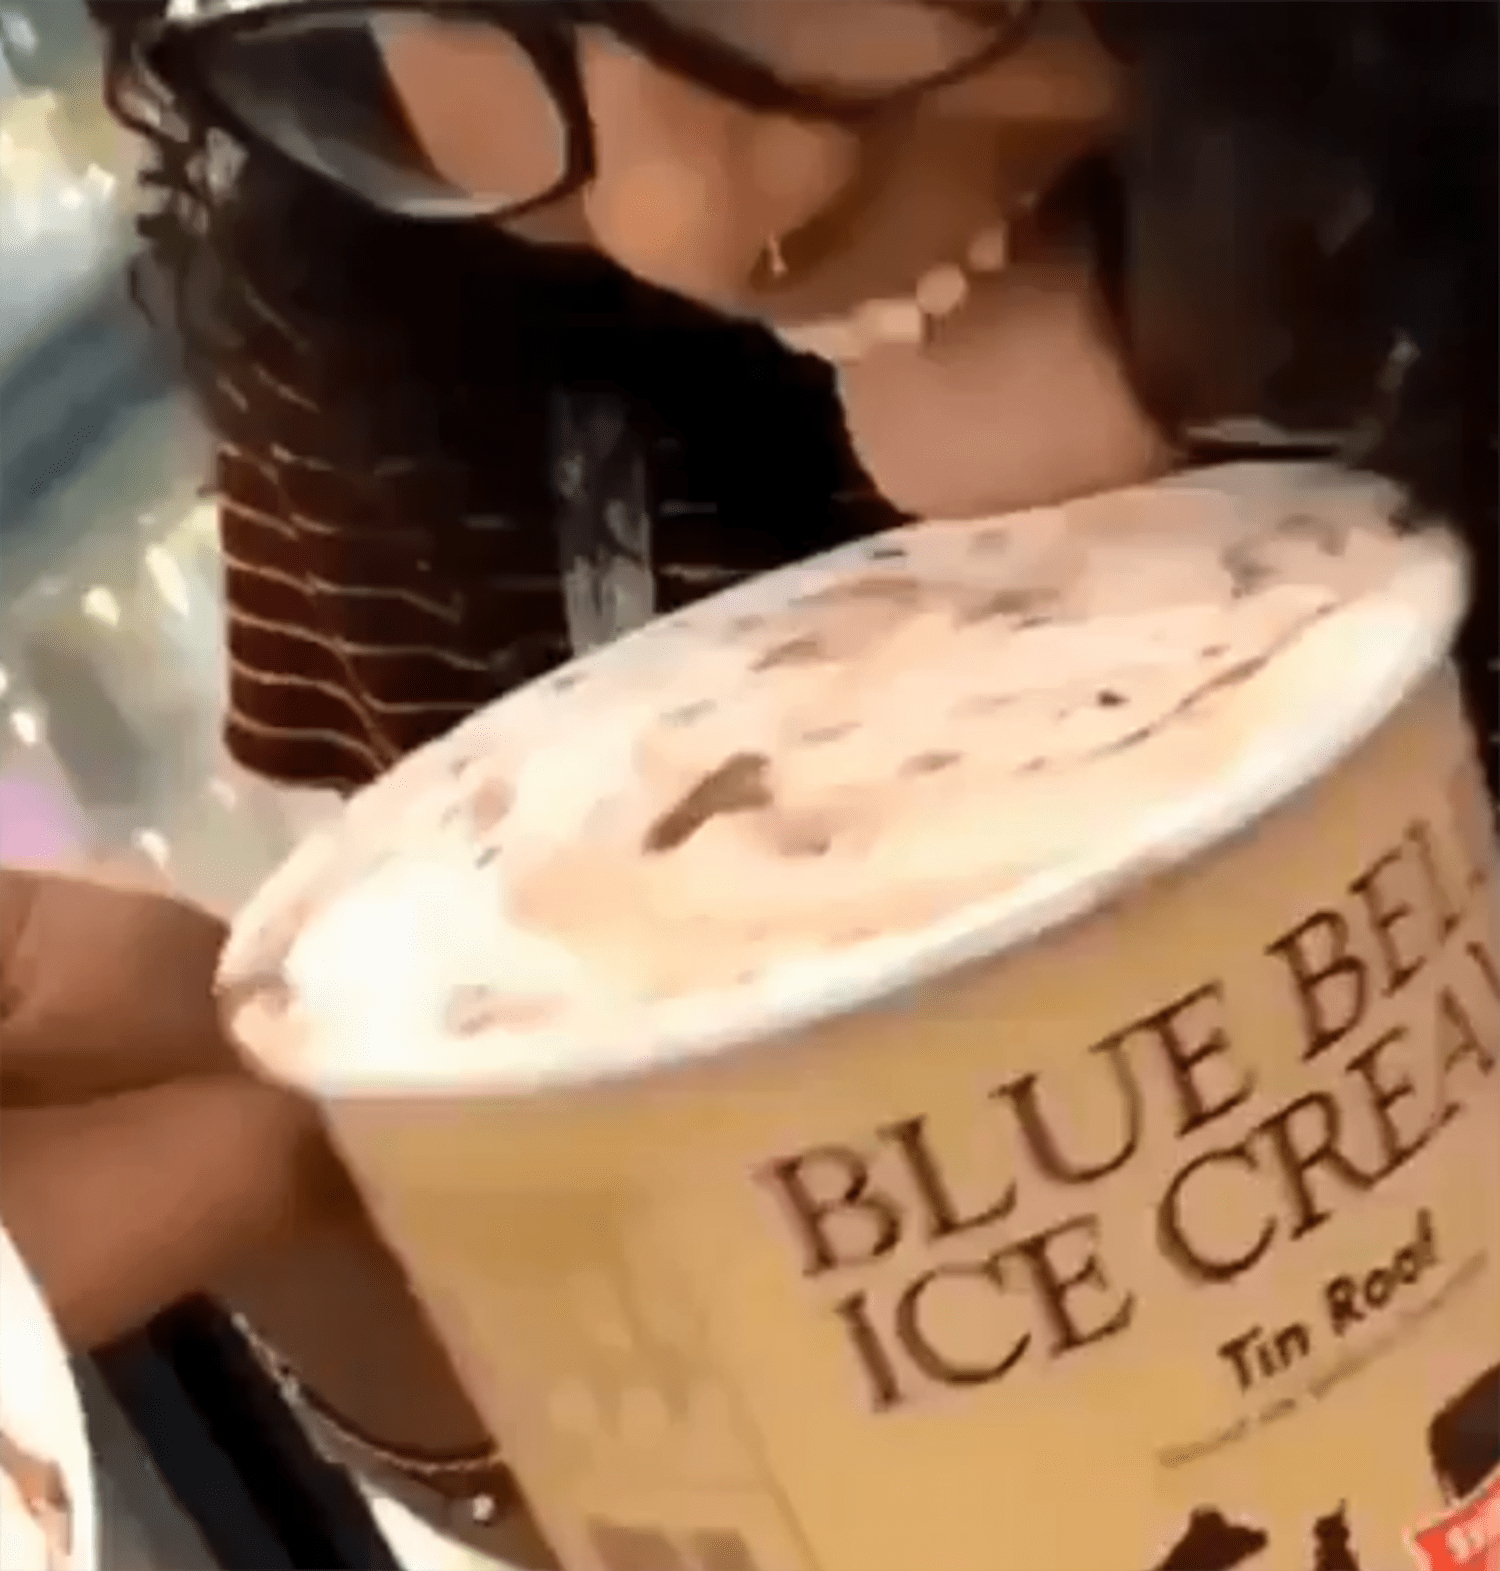 Police find girl who licked Blue Bell ice cream in viral video pic